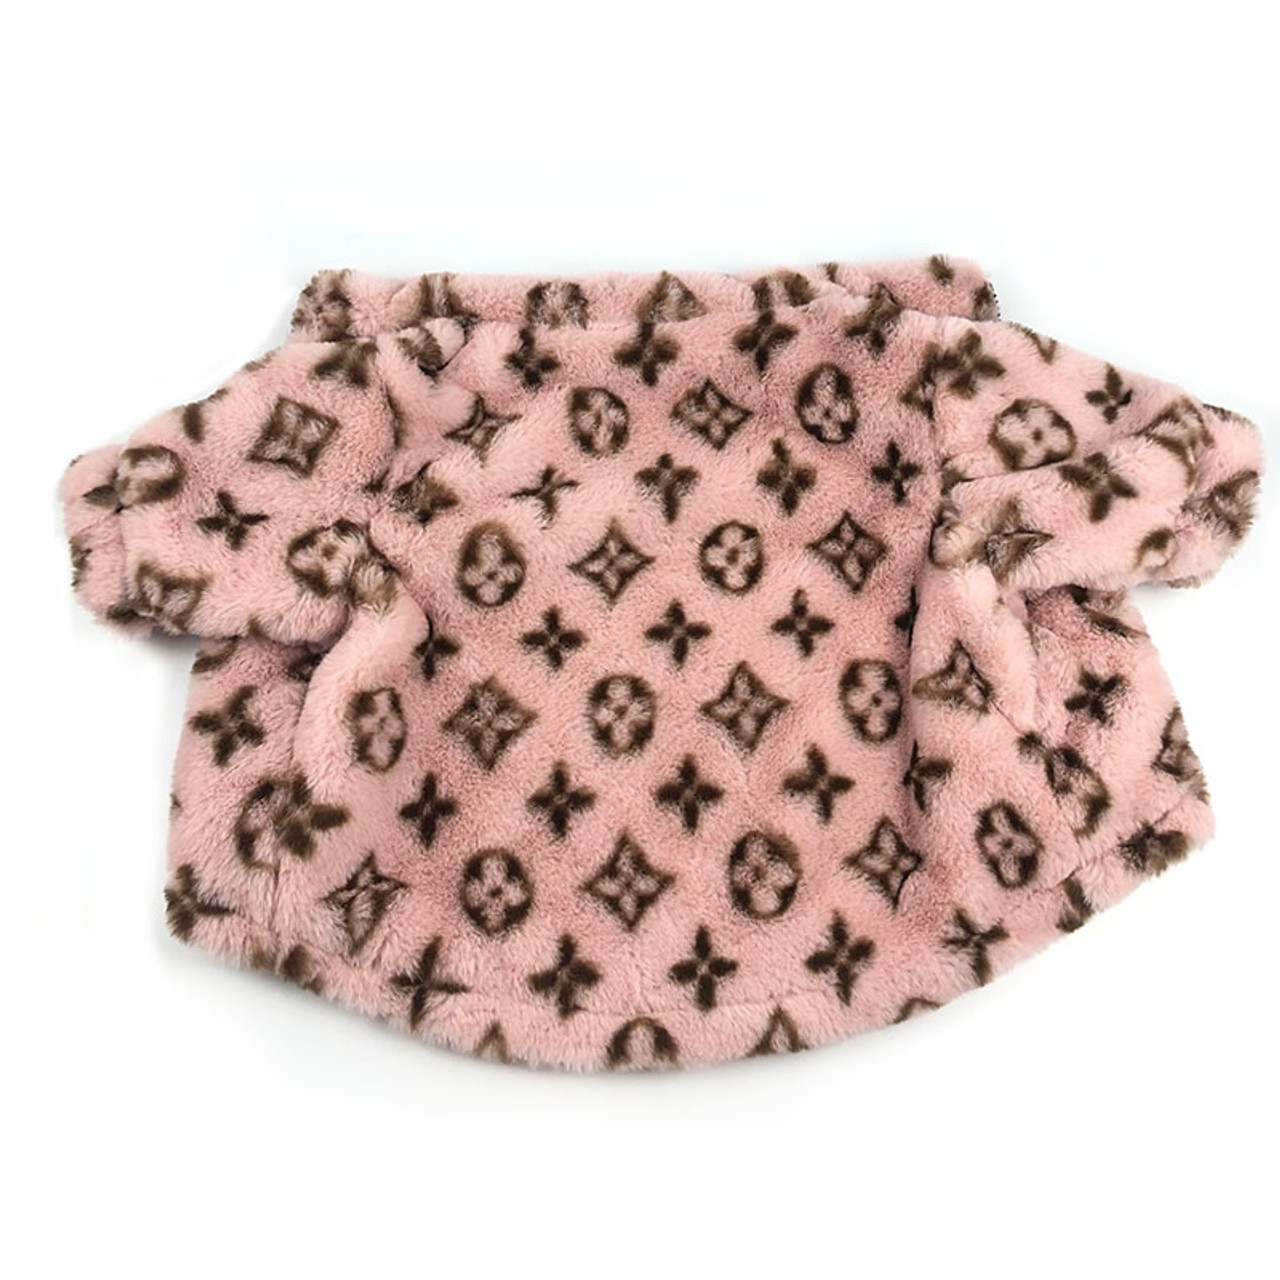 DGG Fashionista Chewy Vuitton Quilted Dog Coat – My Pooch and Me